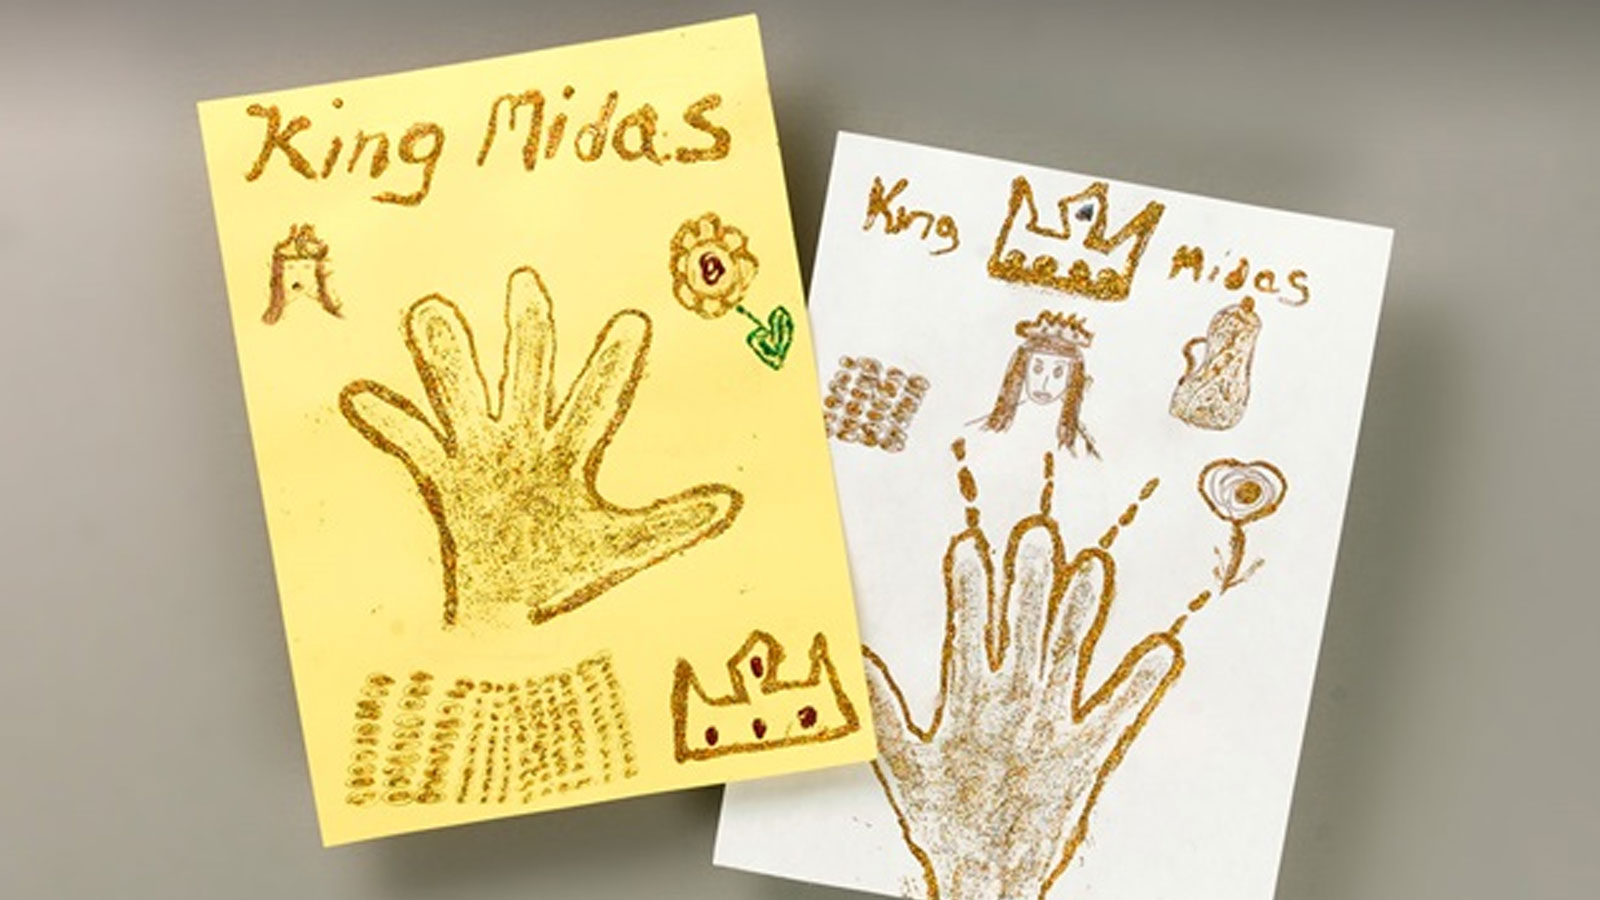 King Midass Golden Touch, Crayola CIY, DIY Crafts for Kids and Adults